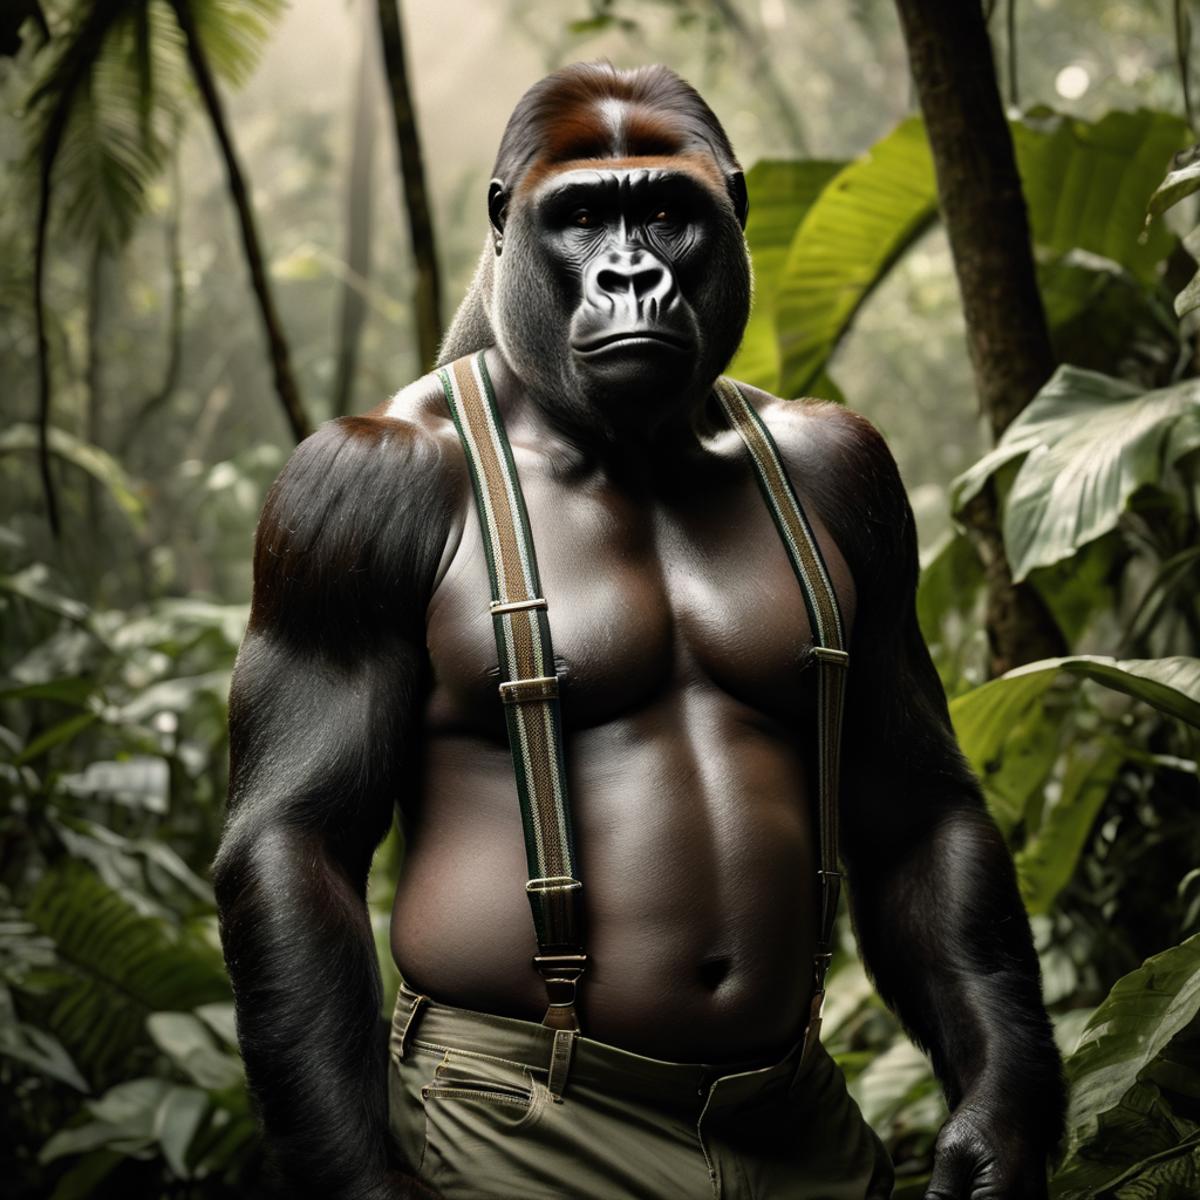 The muscular gorilla in the jungle wearing a suspenders.